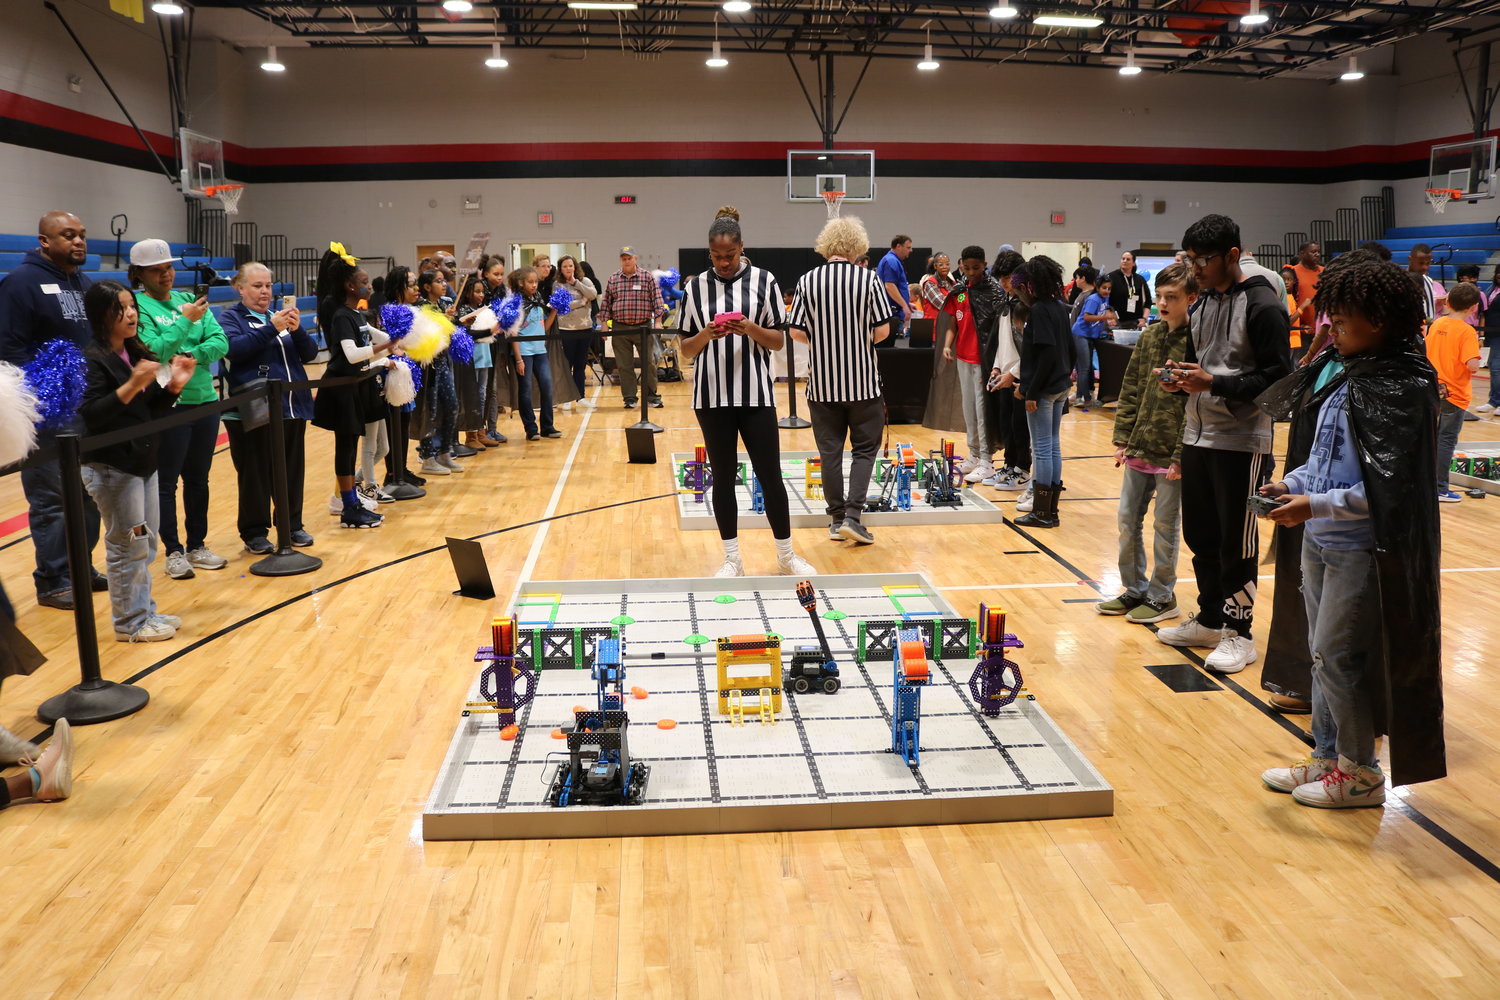 Students making up 28 robotics teams across Madison County Schools recently participated in an invitational tournament at Madison Crossing.